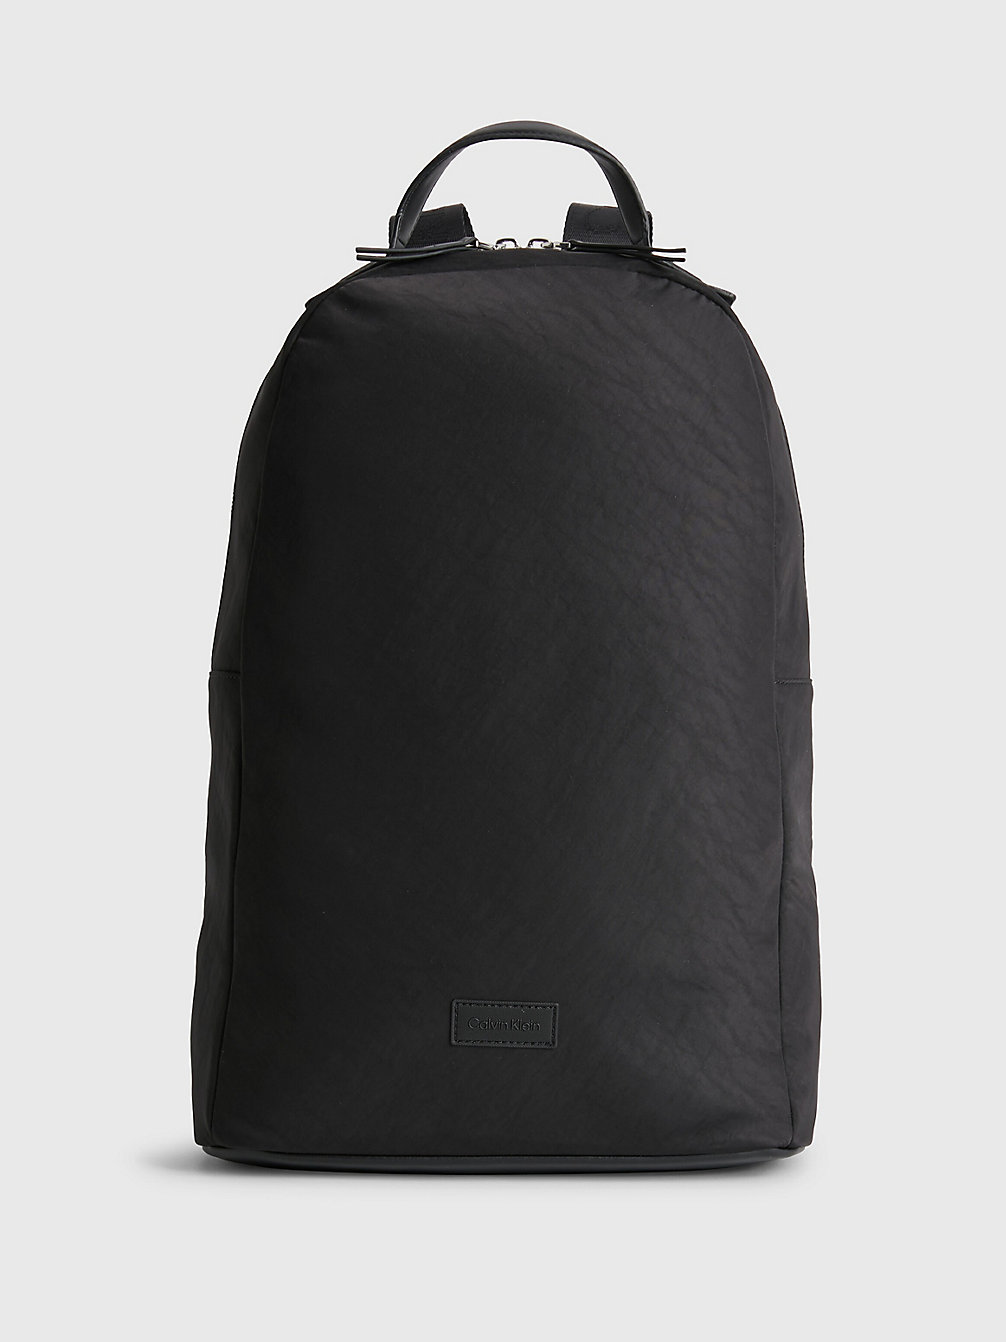 CK BLACK Recycled Nylon Round Backpack undefined women Calvin Klein